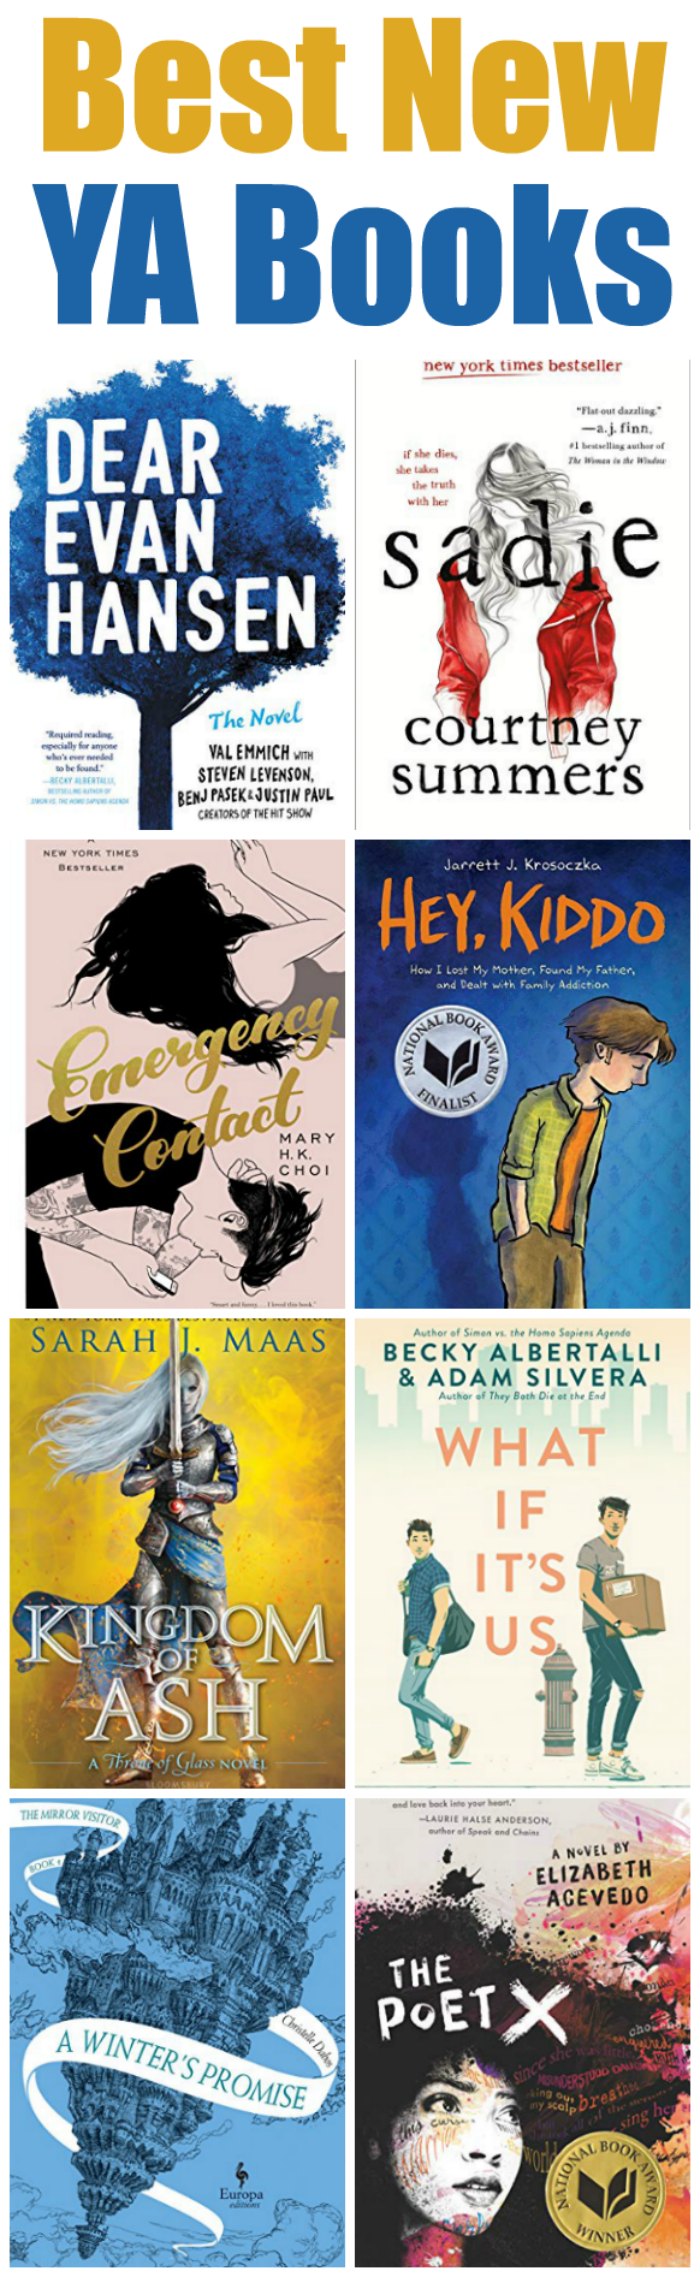 Best New Books for Teens of the Year | Mommy Evolution #newya #yabooks #youngadultbooks